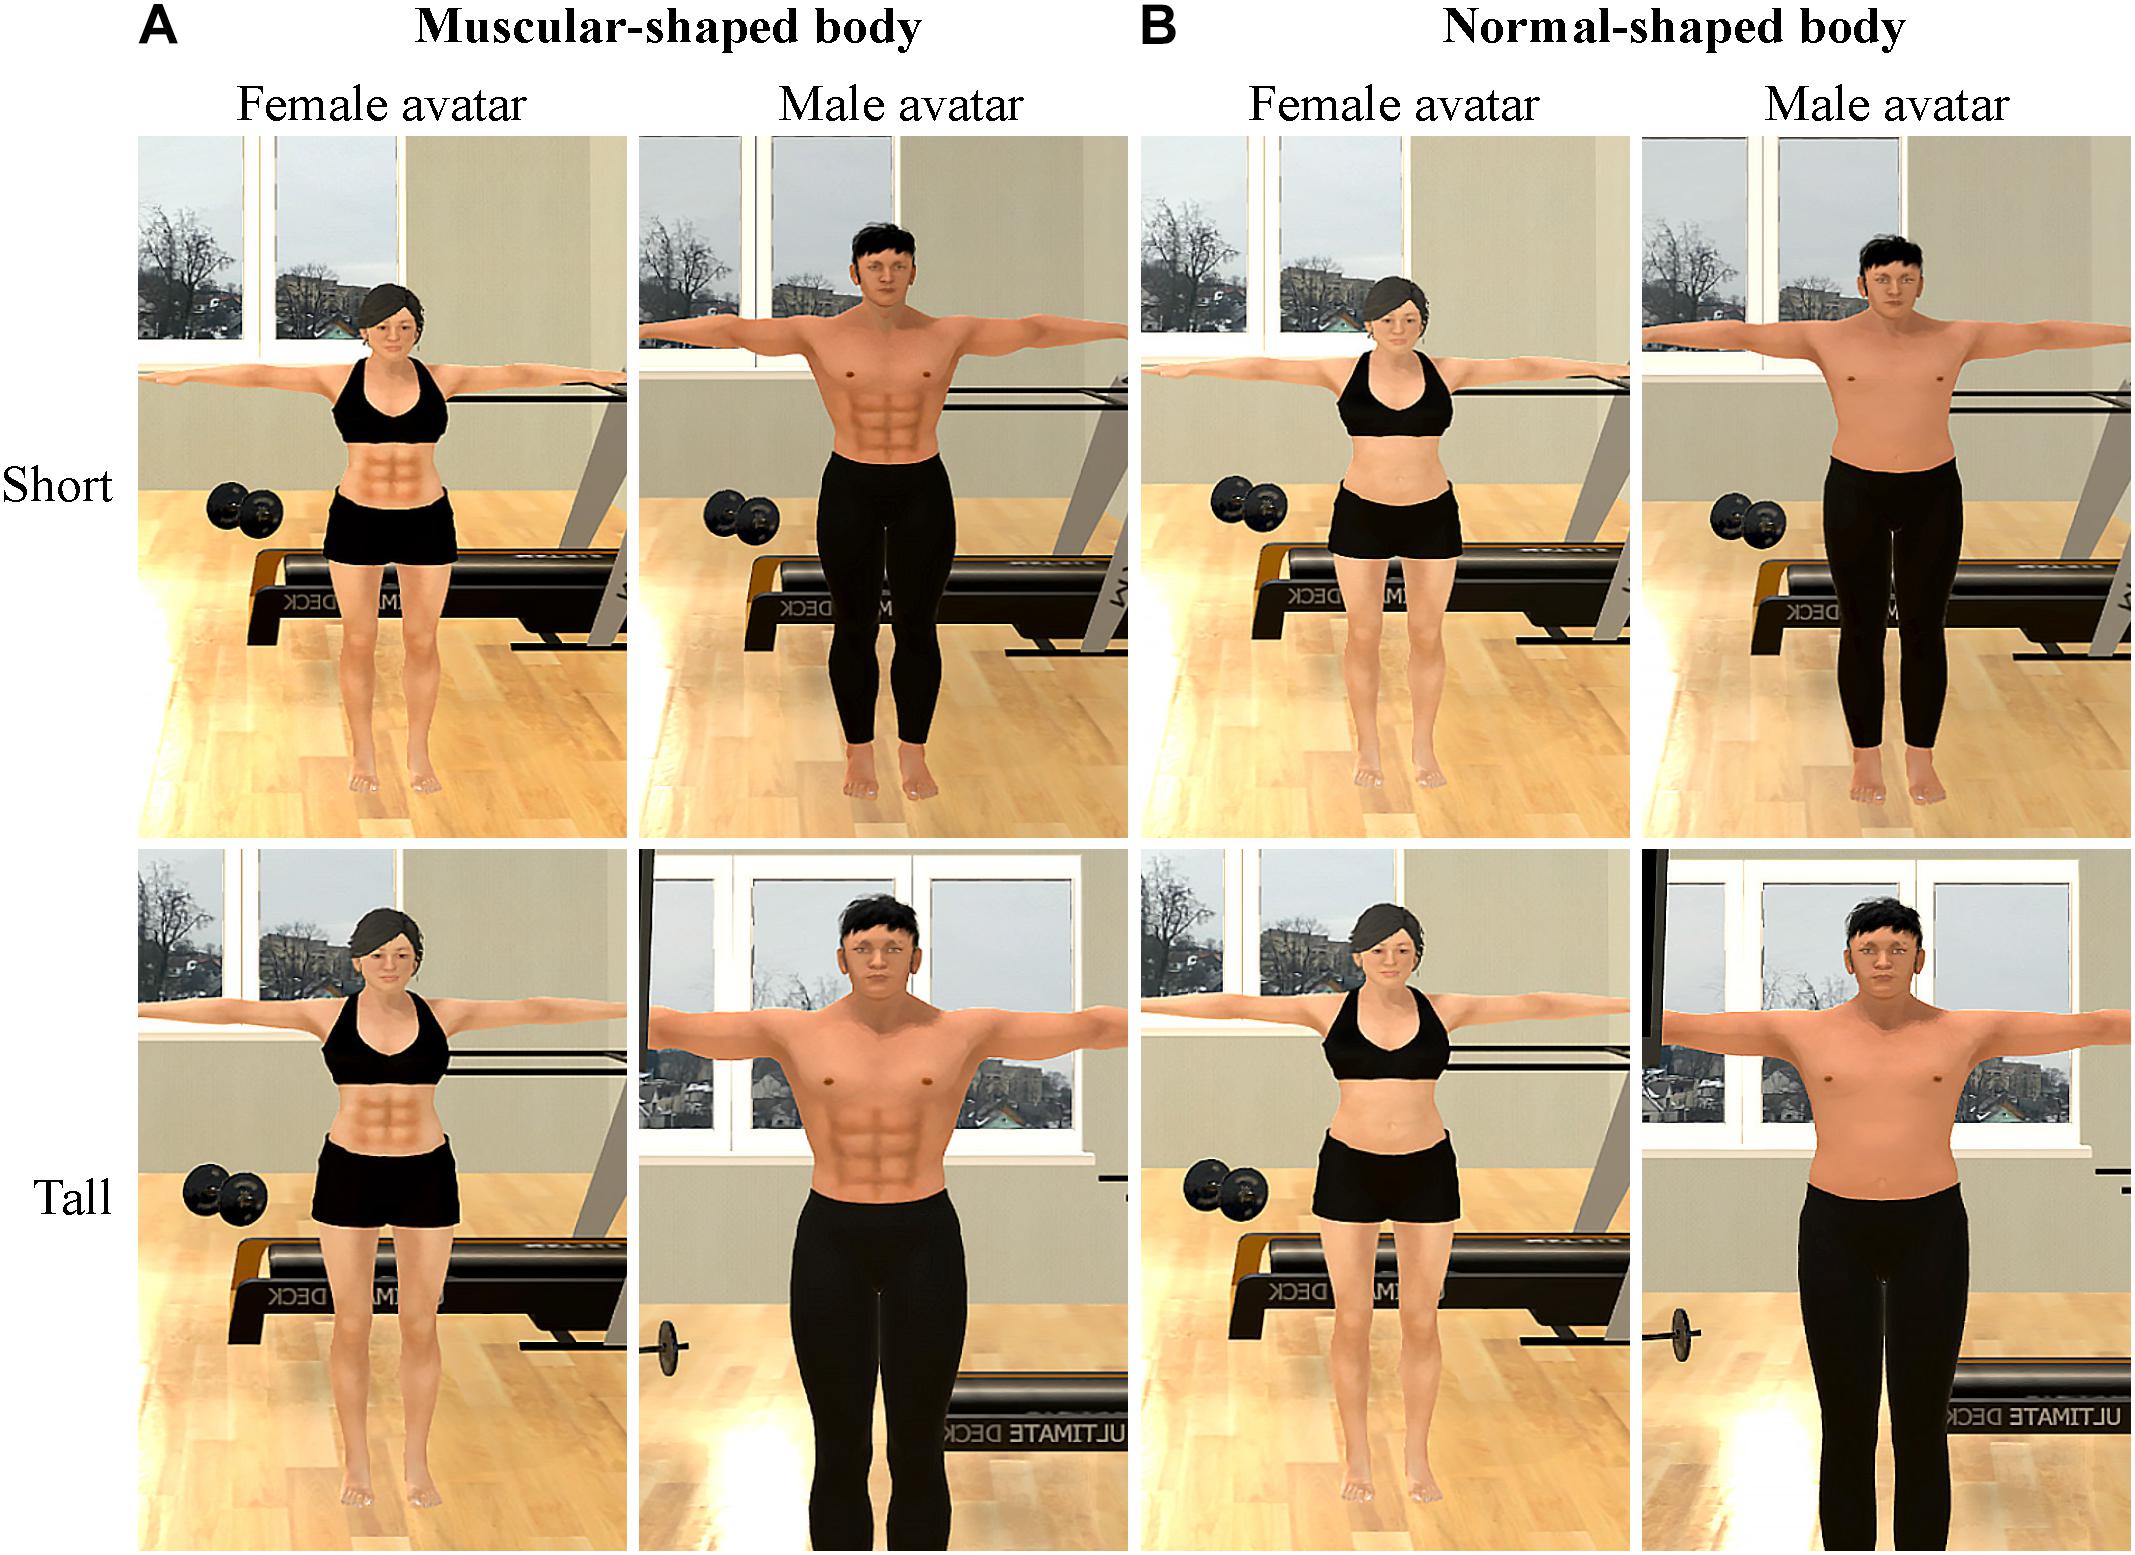 Frontiers  Exercising With a Six Pack in Virtual Reality: Examining the  Proteus Effect of Avatar Body Shape and Sex on Self-Efficacy for Core-Muscle  Exercise, Self-Concept of Body Shape, and Actual Physical